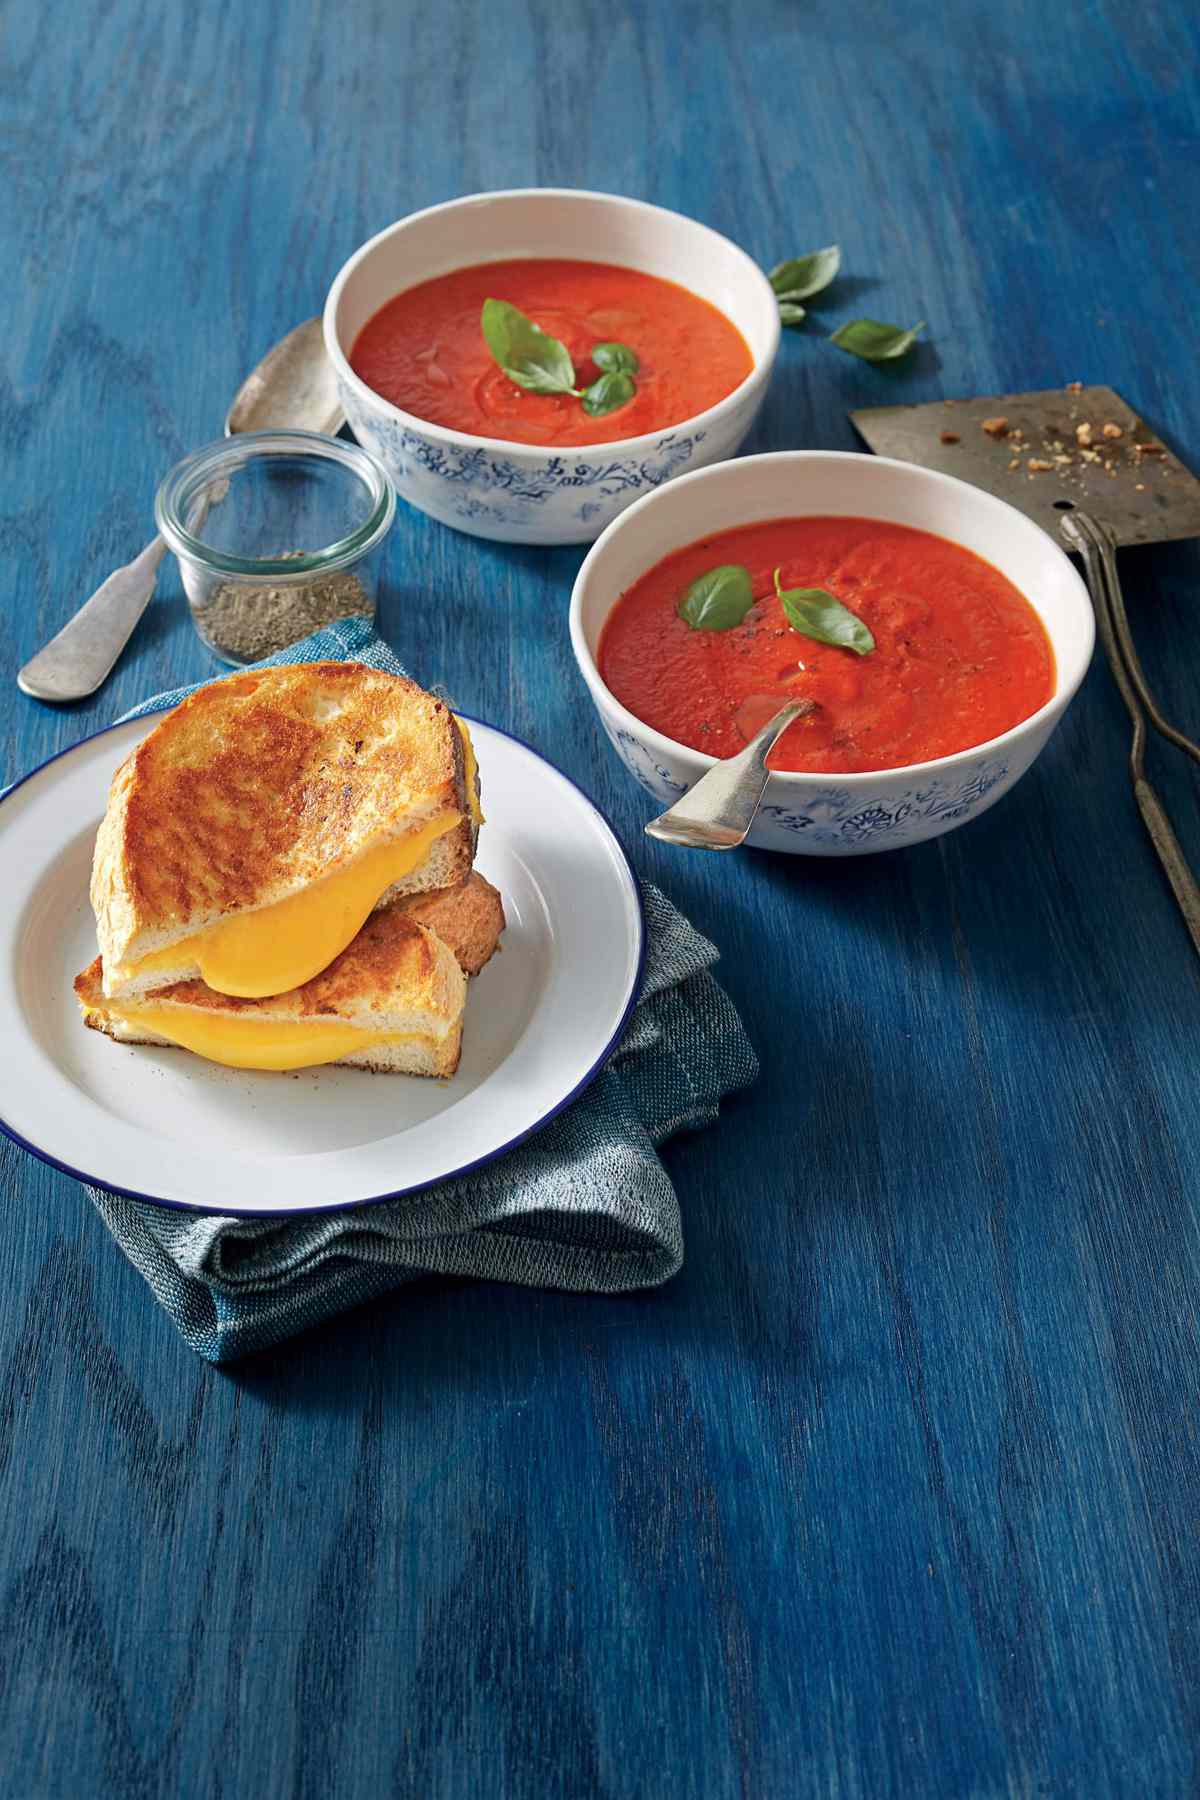 Tomato-and-Red-Pepper Soup